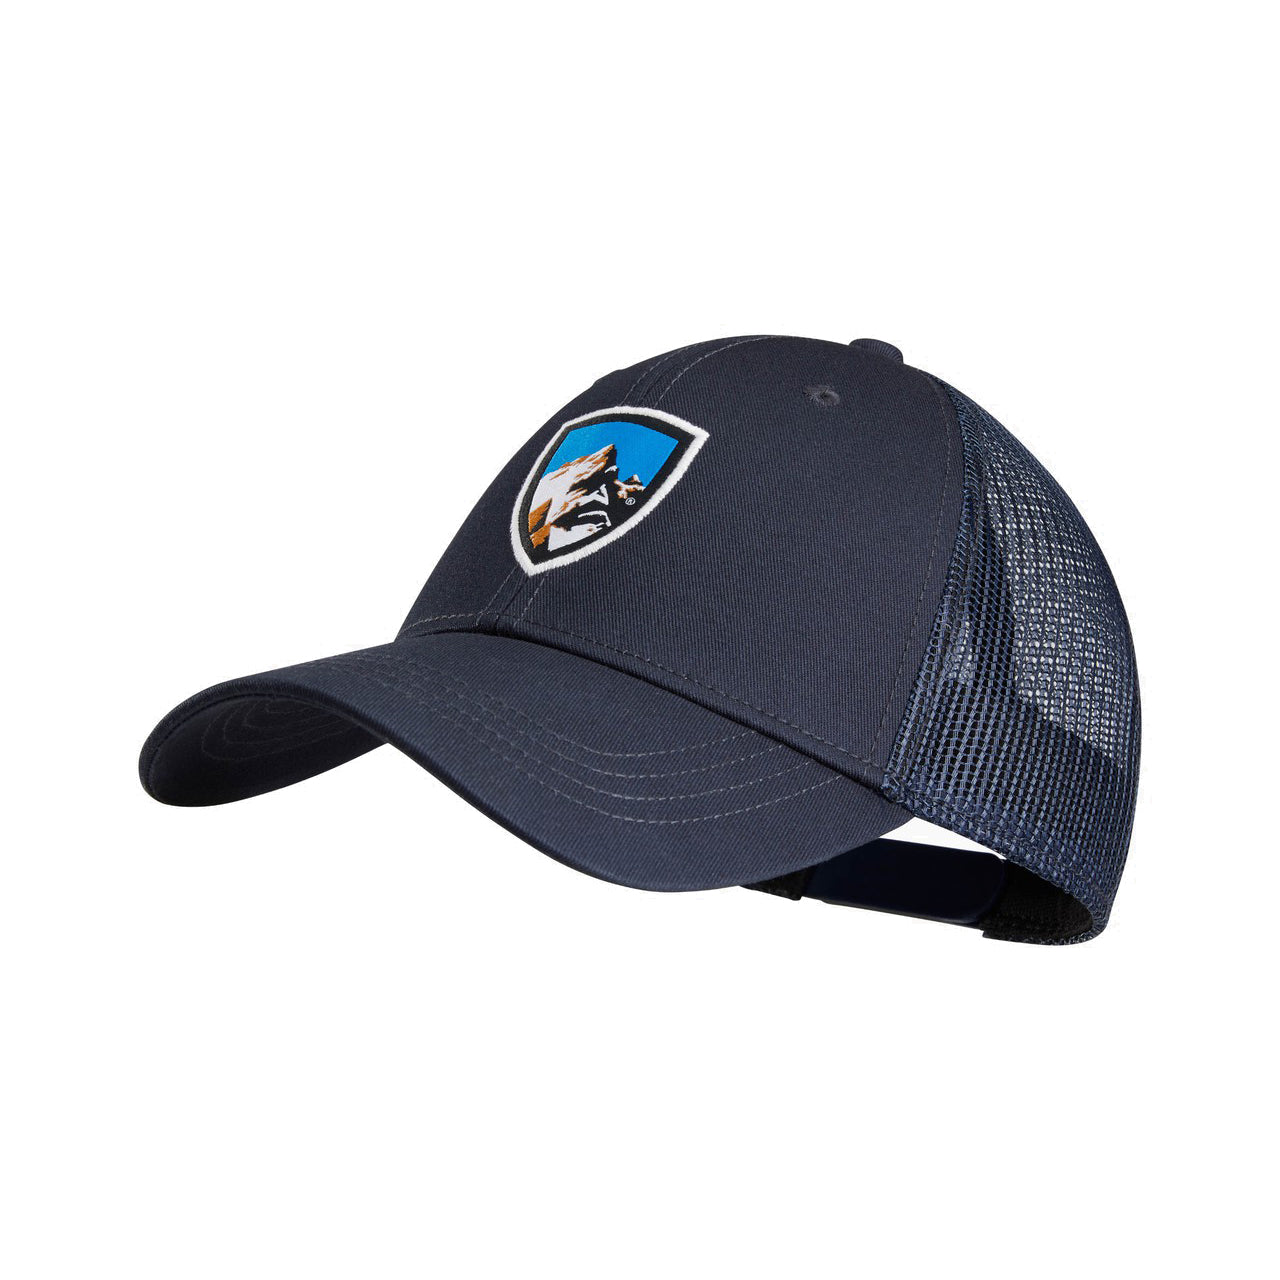 kuhl trucker hat mens three quarter view in color navy blue with kuhl logo and mesh back